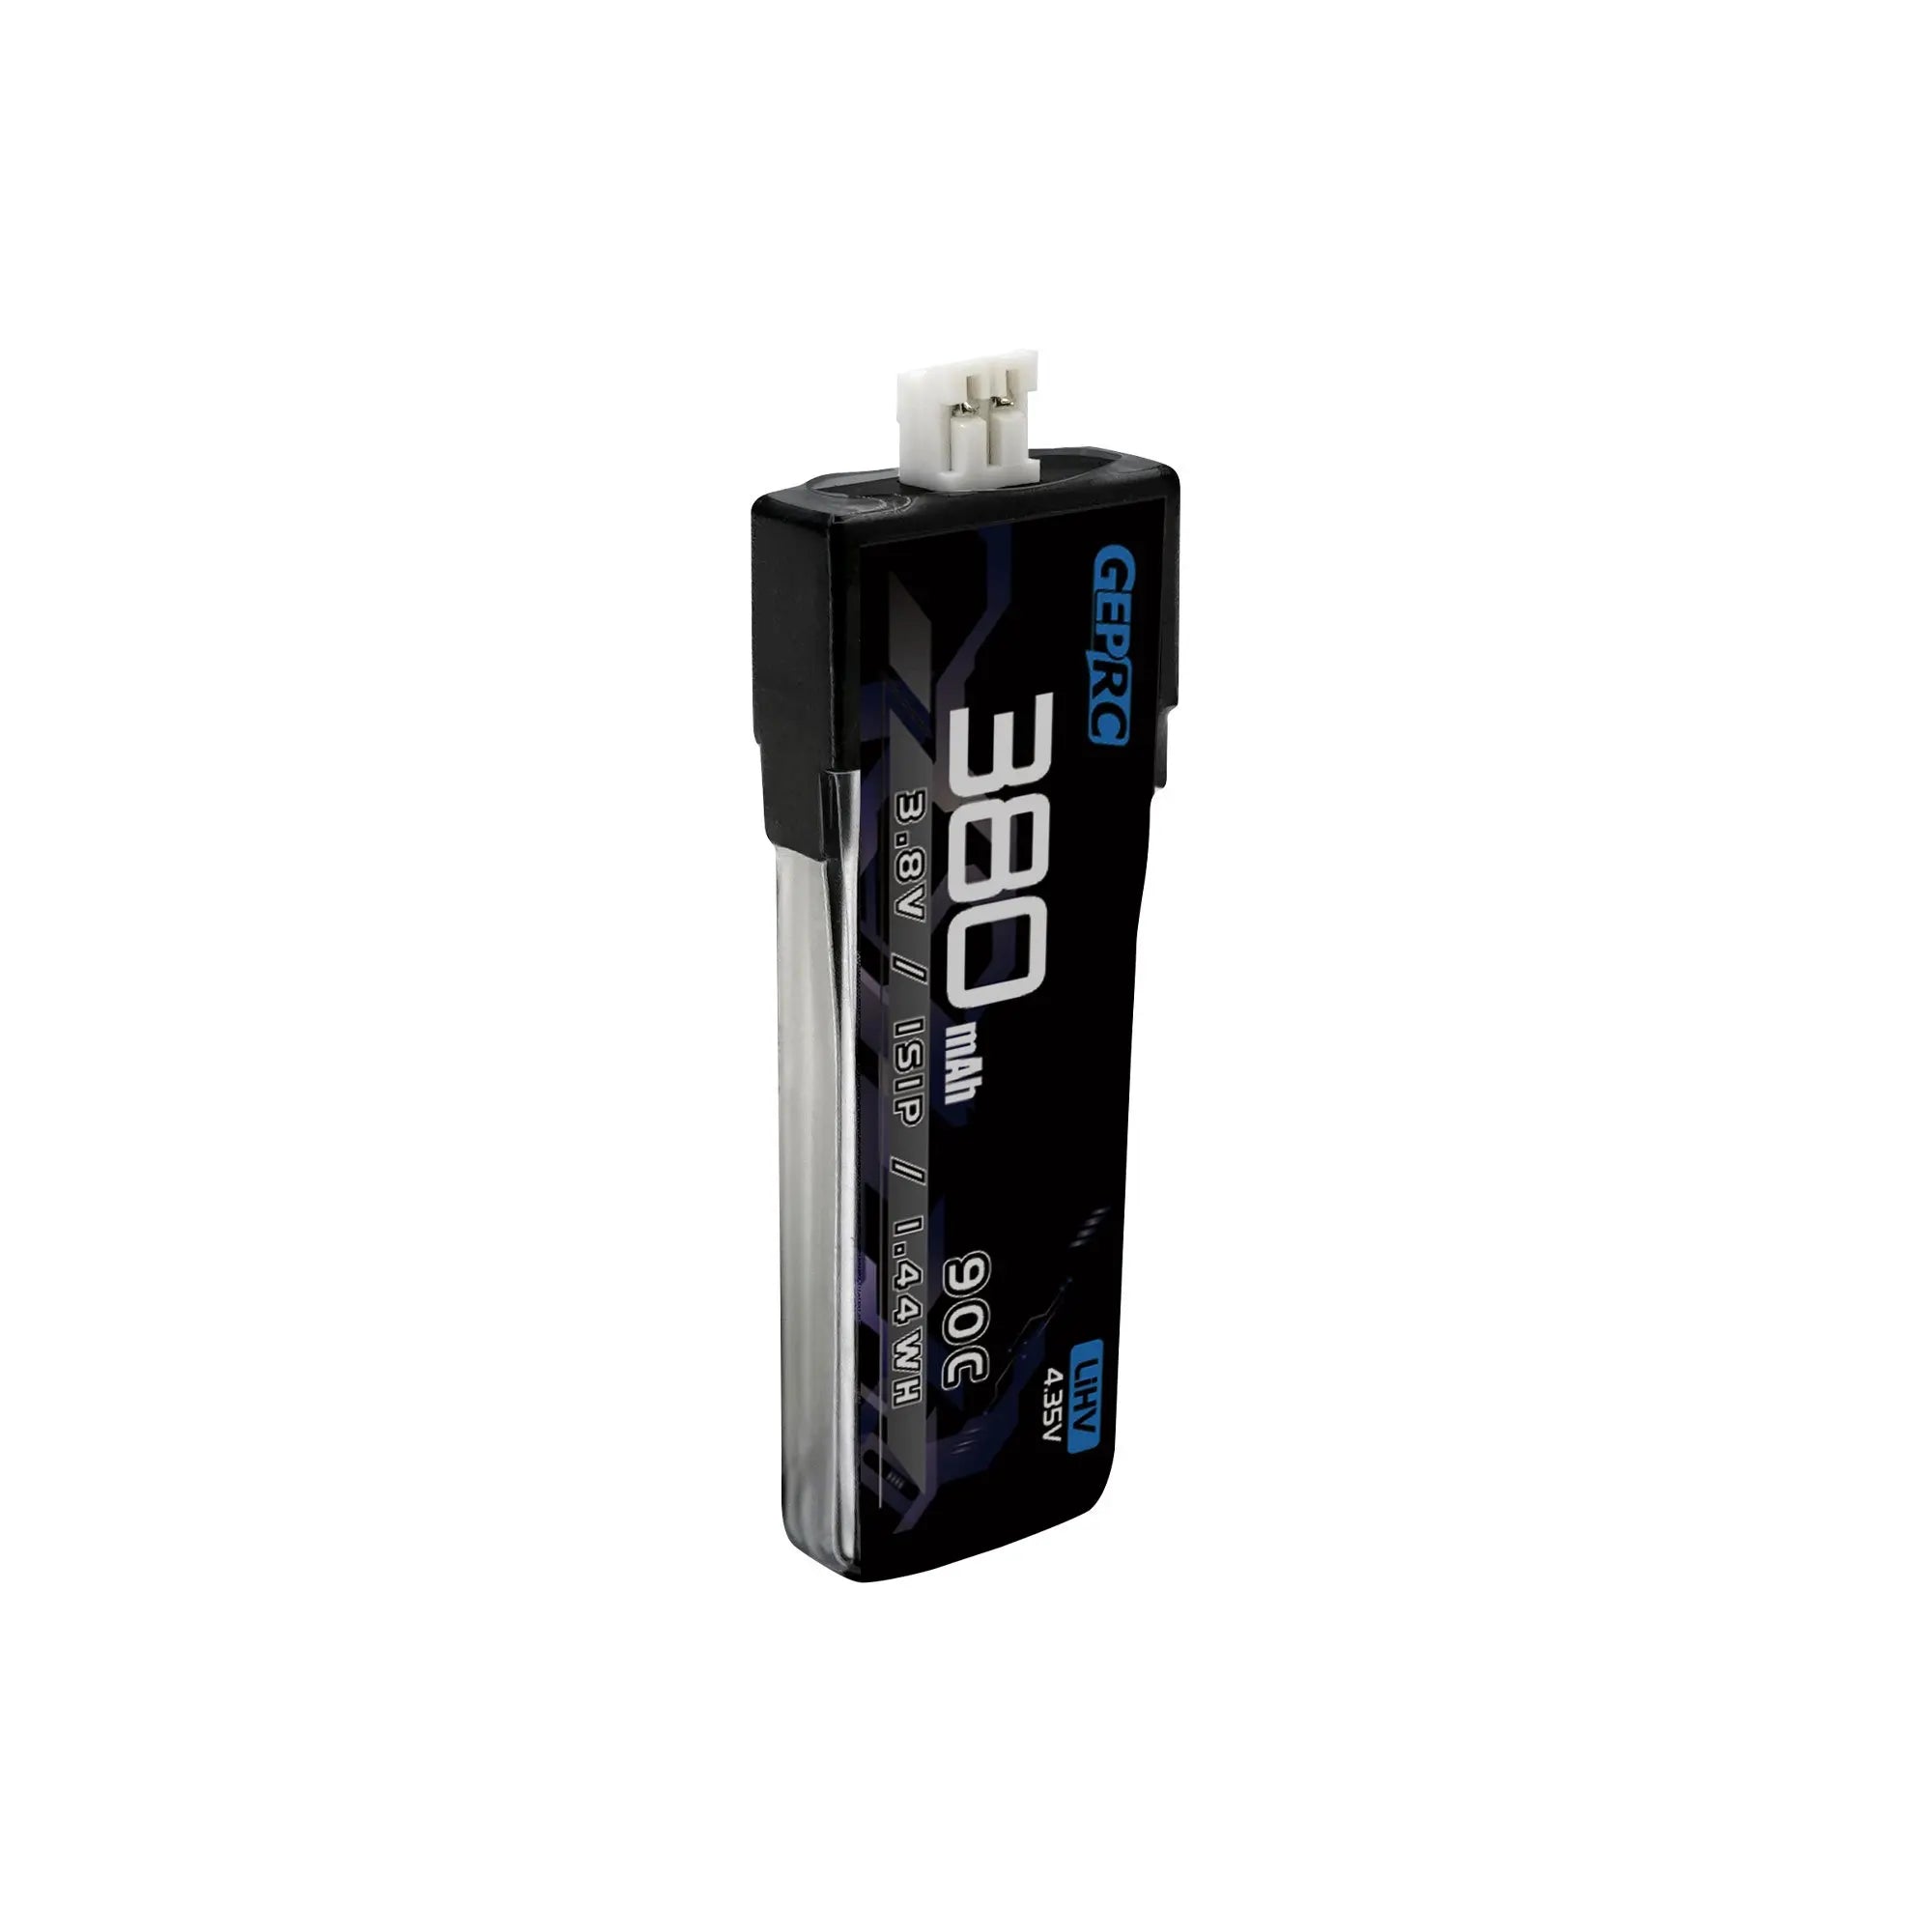 GEPRC 1S 380mAh 90C Battery, a charge-discharge activation is performed within 3 months to maintain the stability of